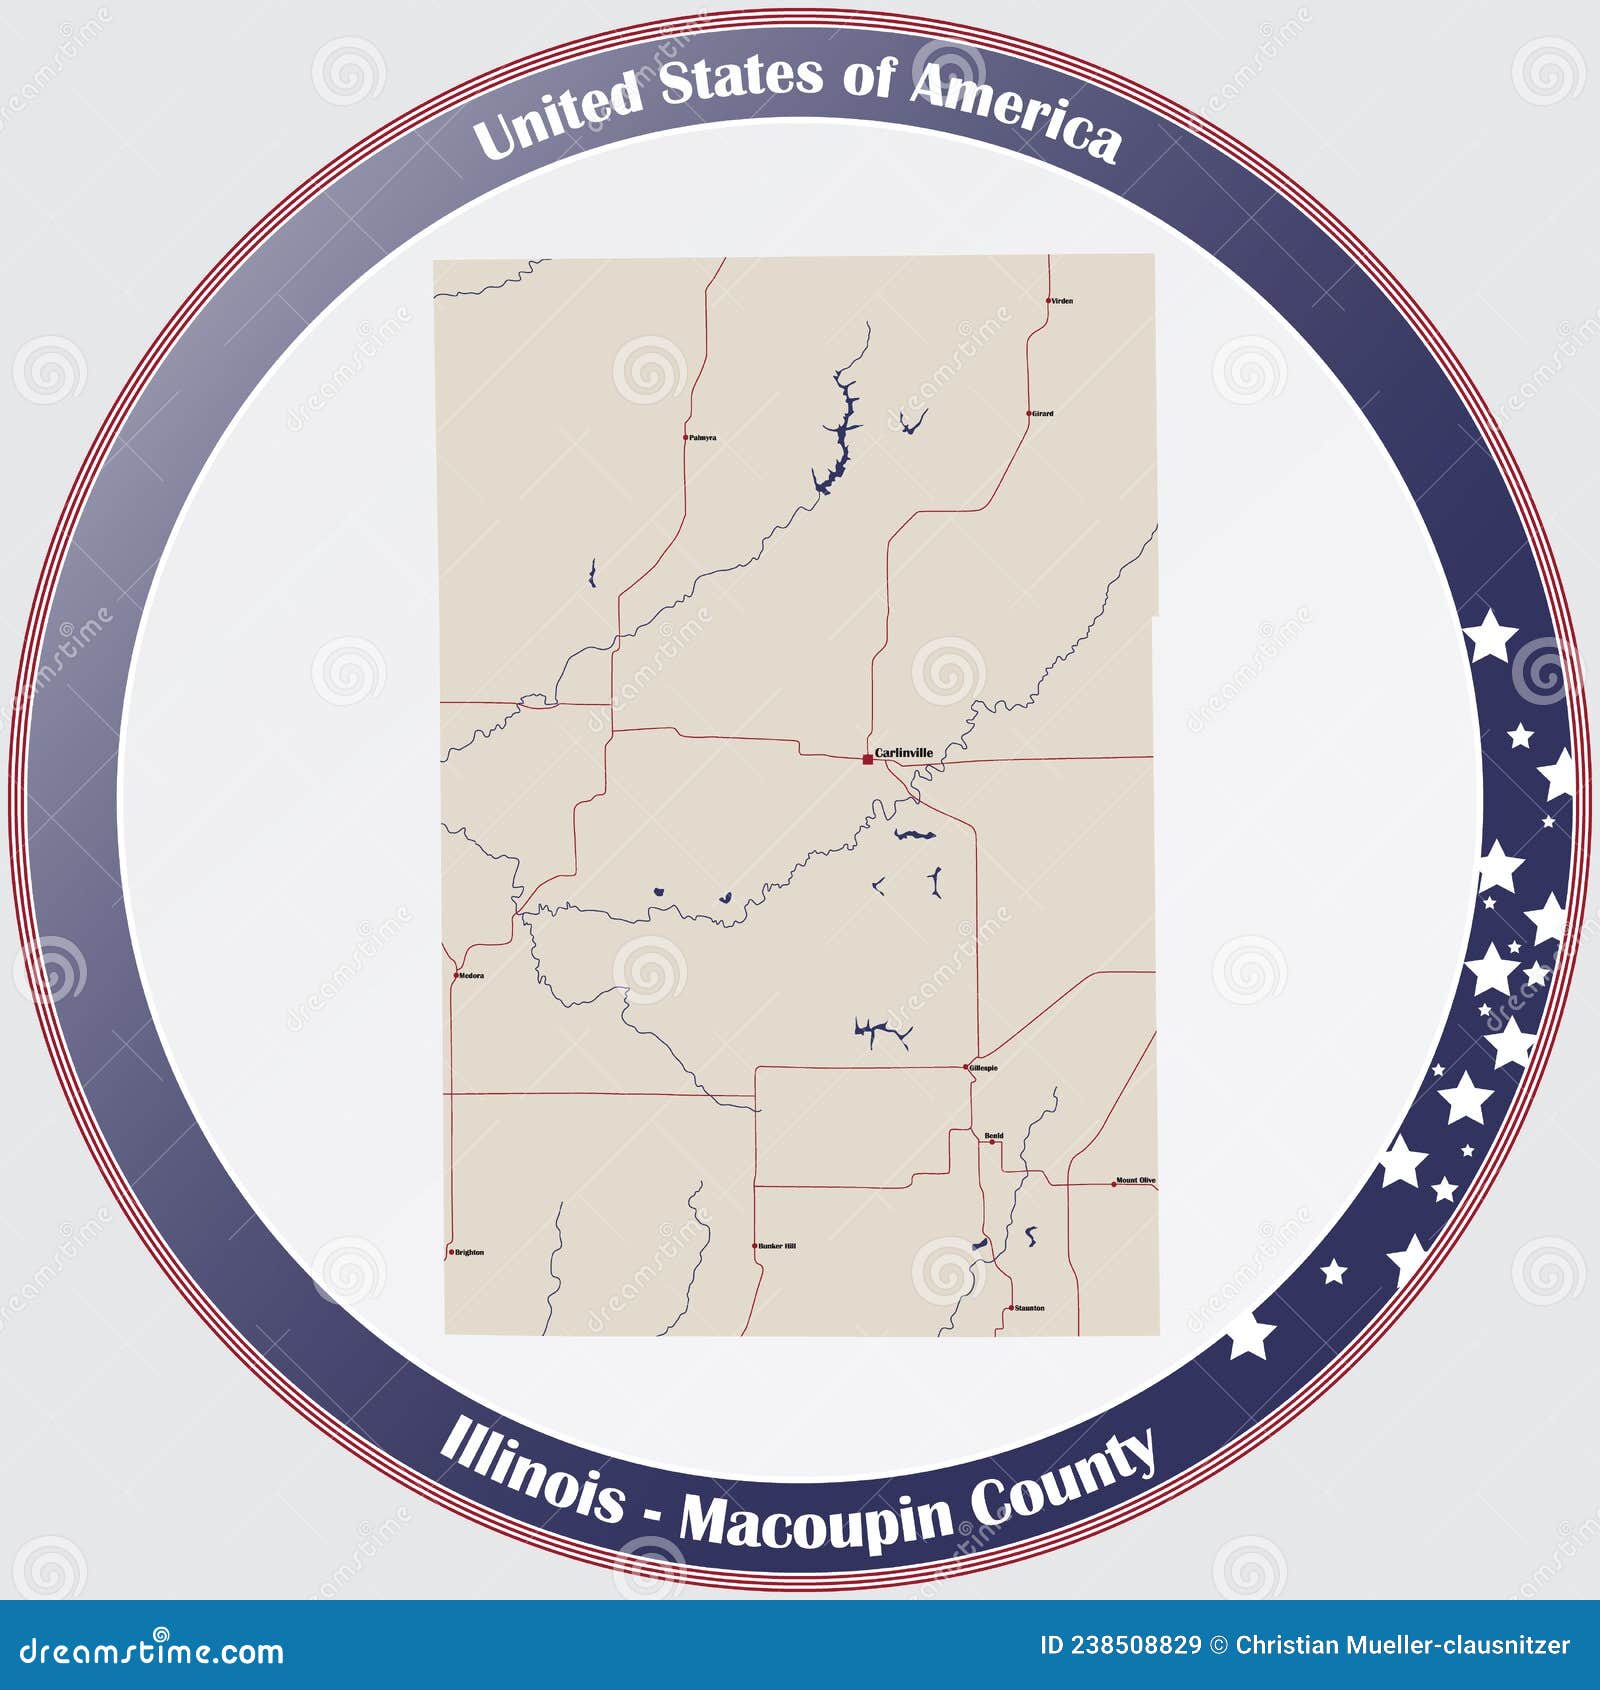 map of macoupin county in illinois